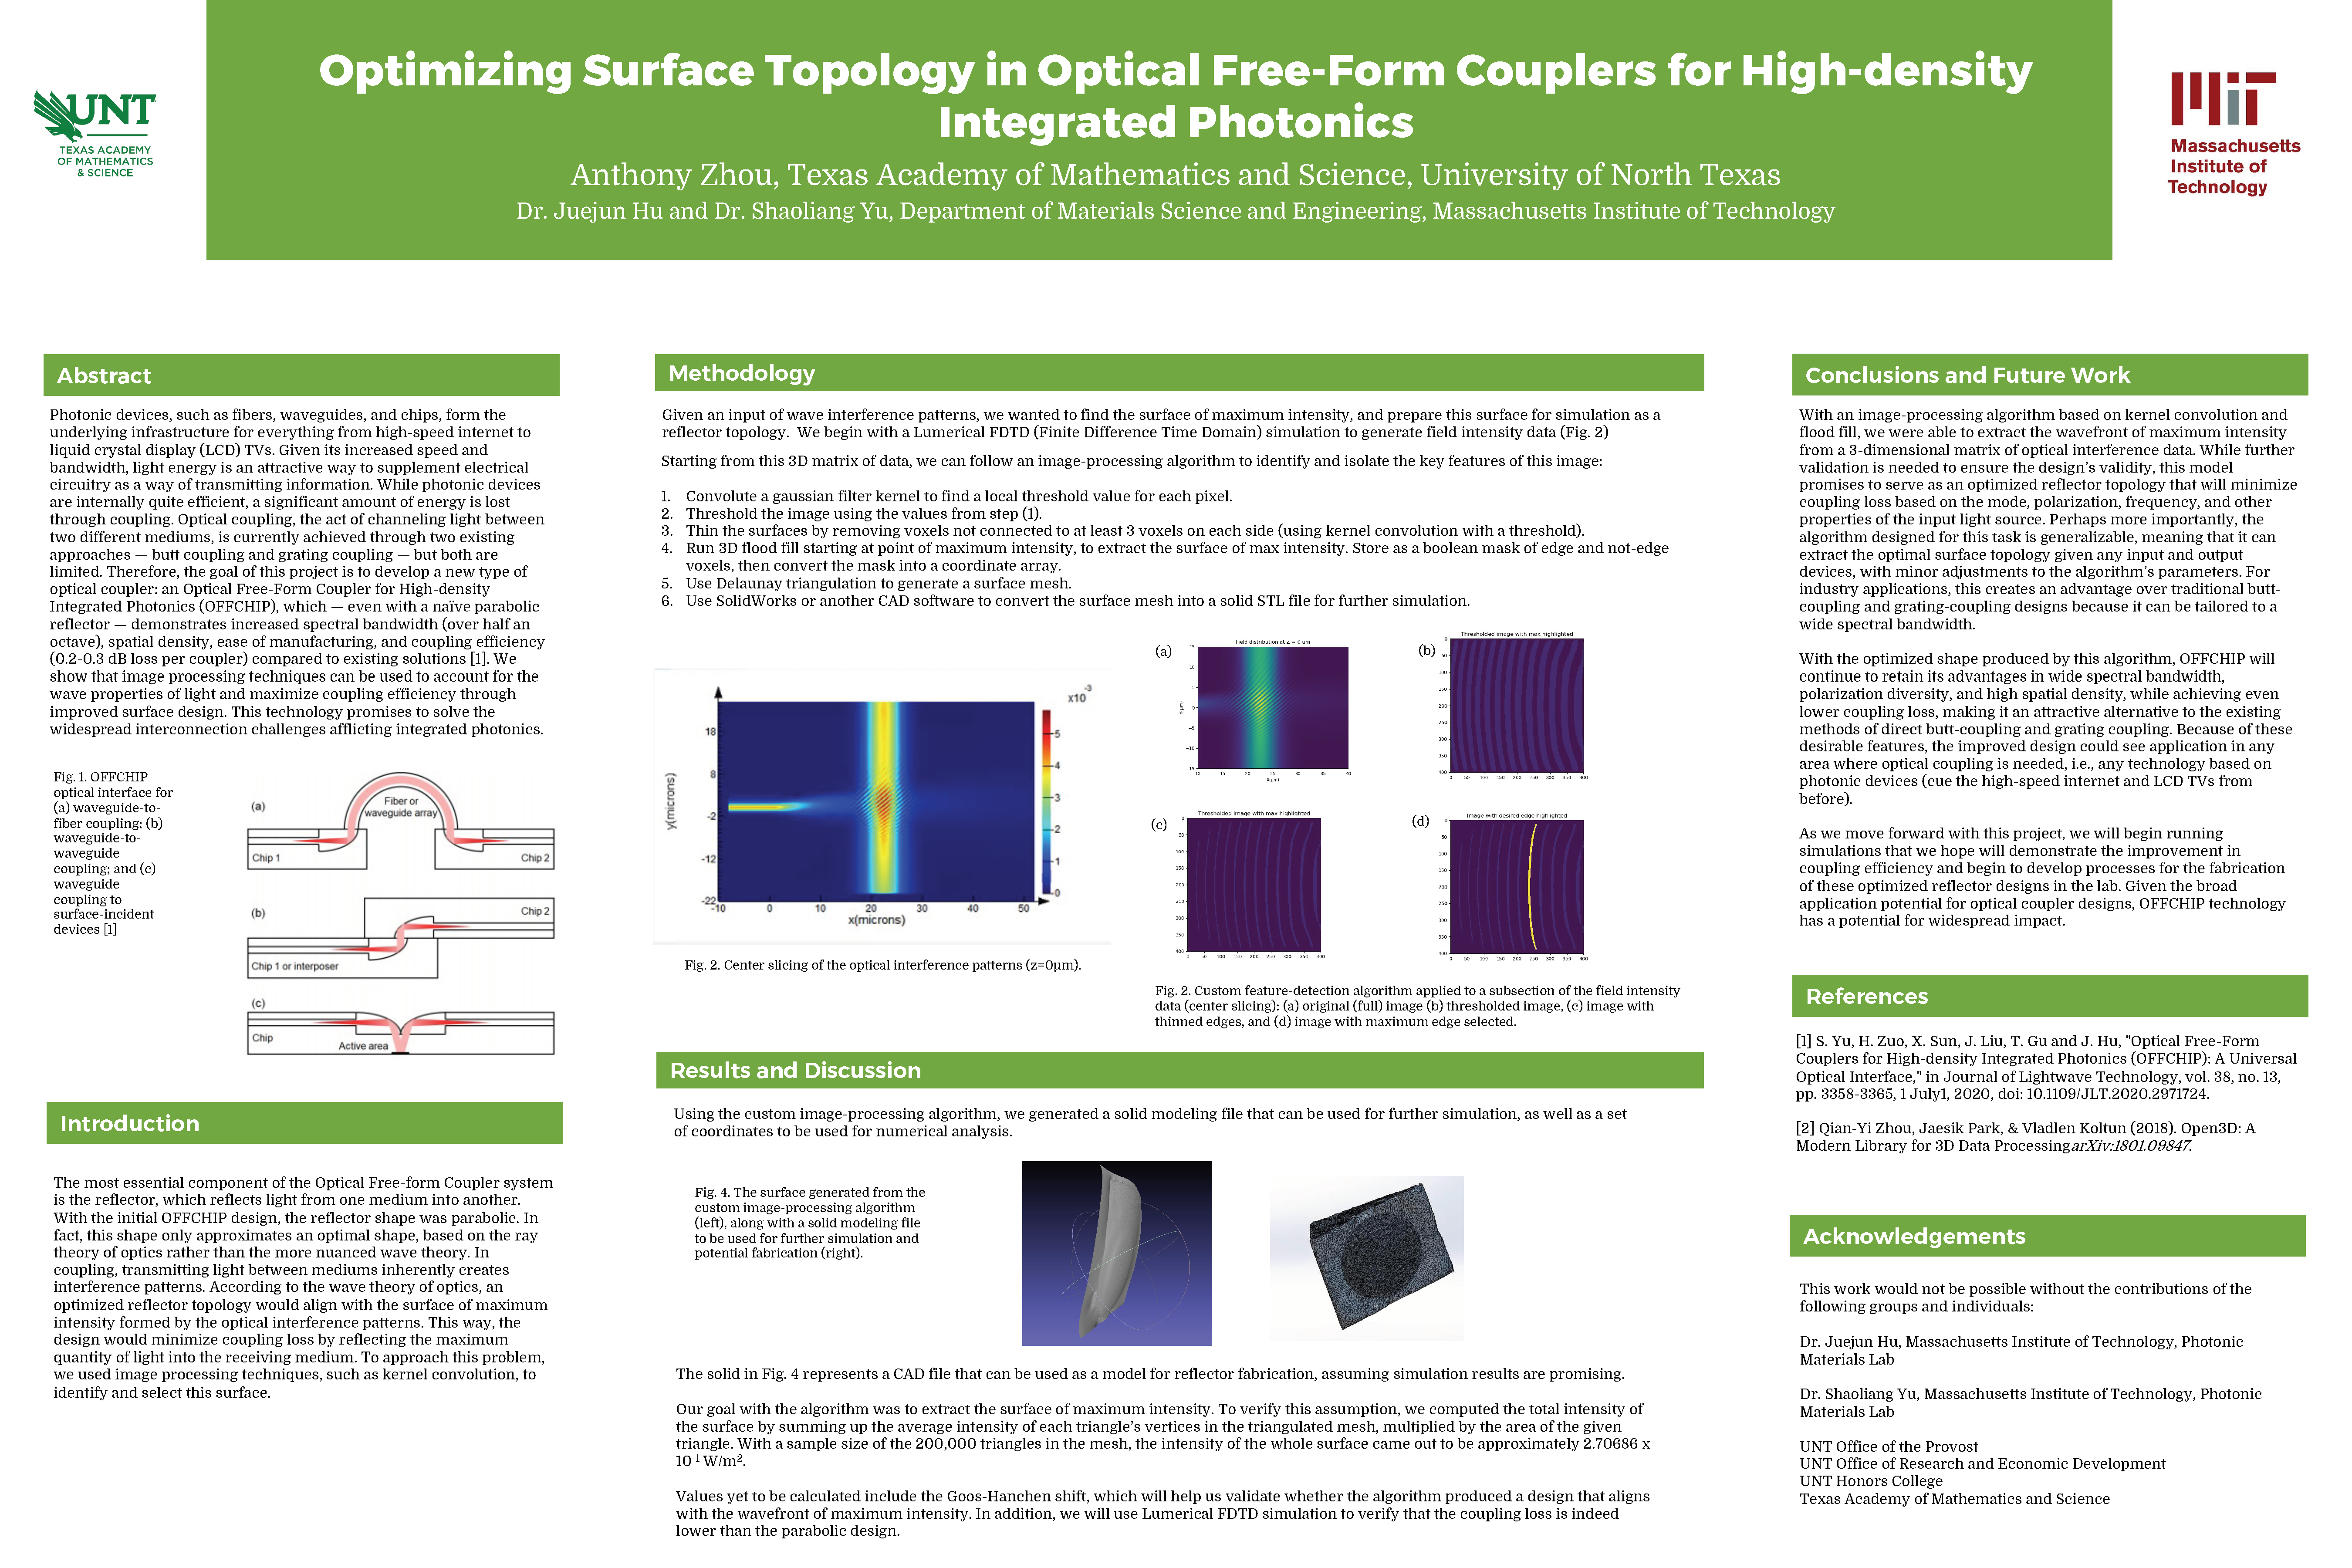 Optimizing Surface Topology in Optical Free-Form Couplers for High-density Integrated Photonics